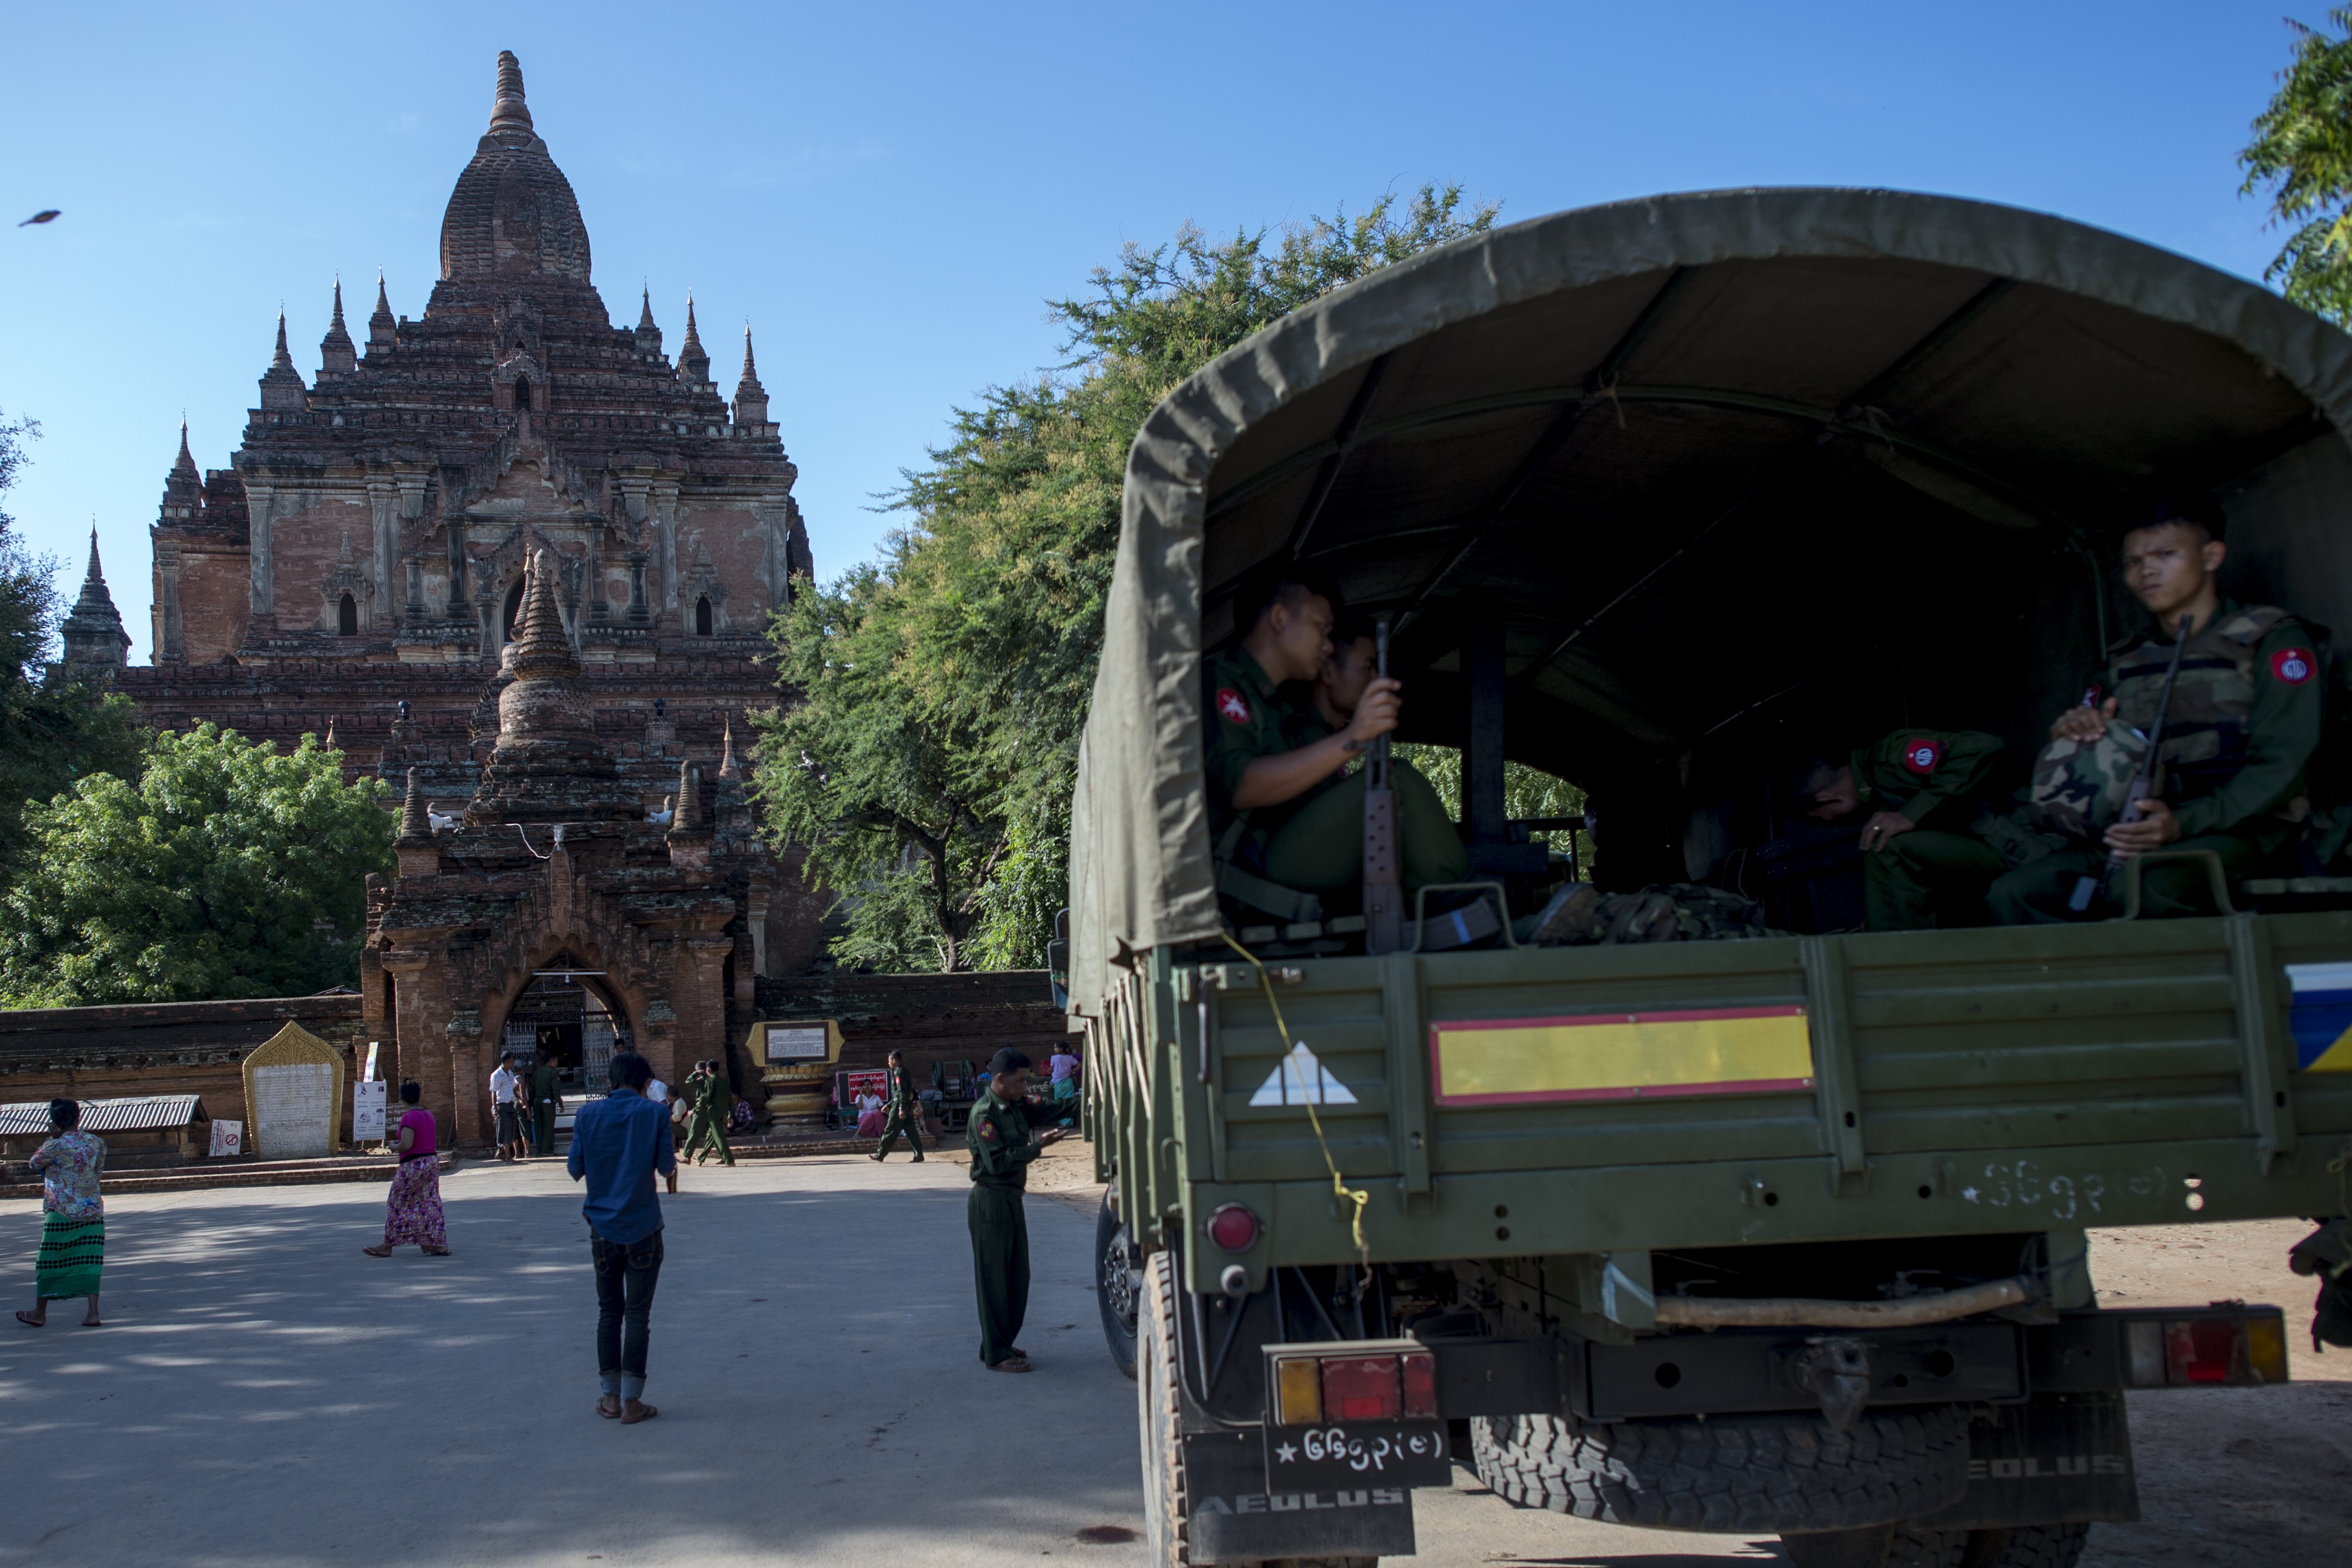 Myanmar military staff sit in a truck outside the damaged ancient Htilominlo Temple on August 25, 2016, after a 6.8 magnitude earthquake hit Bagan. A powerful 6.8 magnitude earthquake struck central Myanmar on August 24, killing at least three people and damaging nearly 200 pagodas in the famous ancient capital of Bagan, officials said. The quake, which the US Geological Survey said hit at a depth of 84 kilometres (52 miles), was also felt across neighbouring Thailand, India and Bangladesh, sending panicked residents rushing onto the streets.  / AFP PHOTO / YE AUNG THU